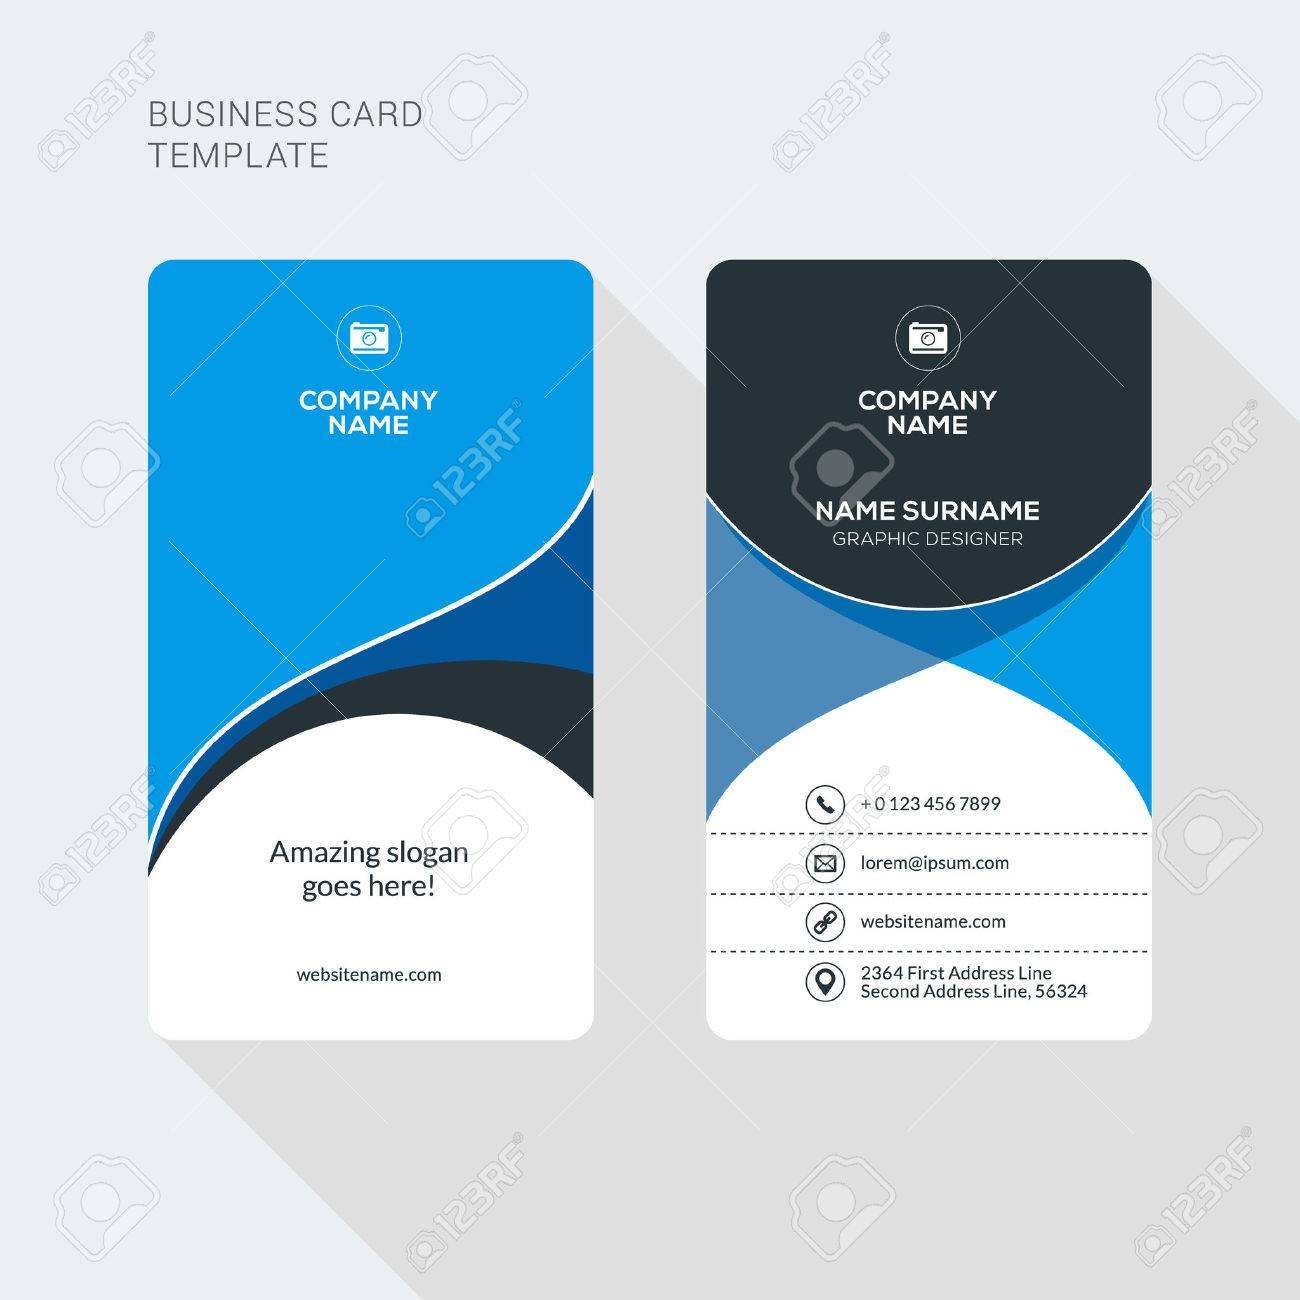 52 How To Create Business Card Template Horizontal Layouts by Business Card Template Horizontal